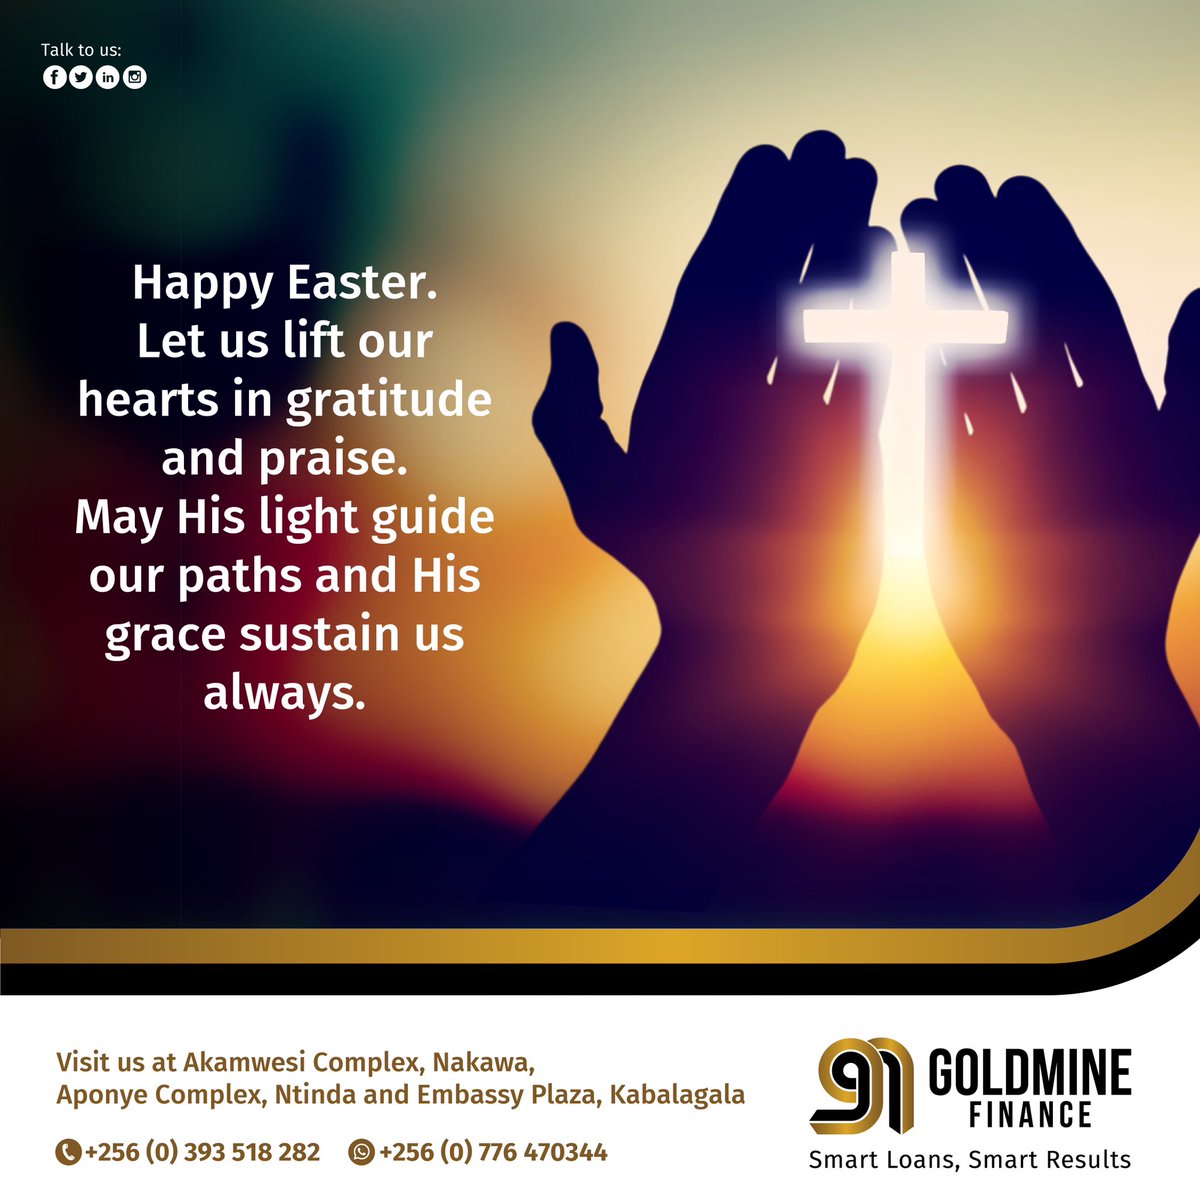 Happy Easter Monday. In the spirit of gratitude, what are you thankful for this #Easter? #GoldmineFinance #SmartLoansSmartResults #HappyNewMonth